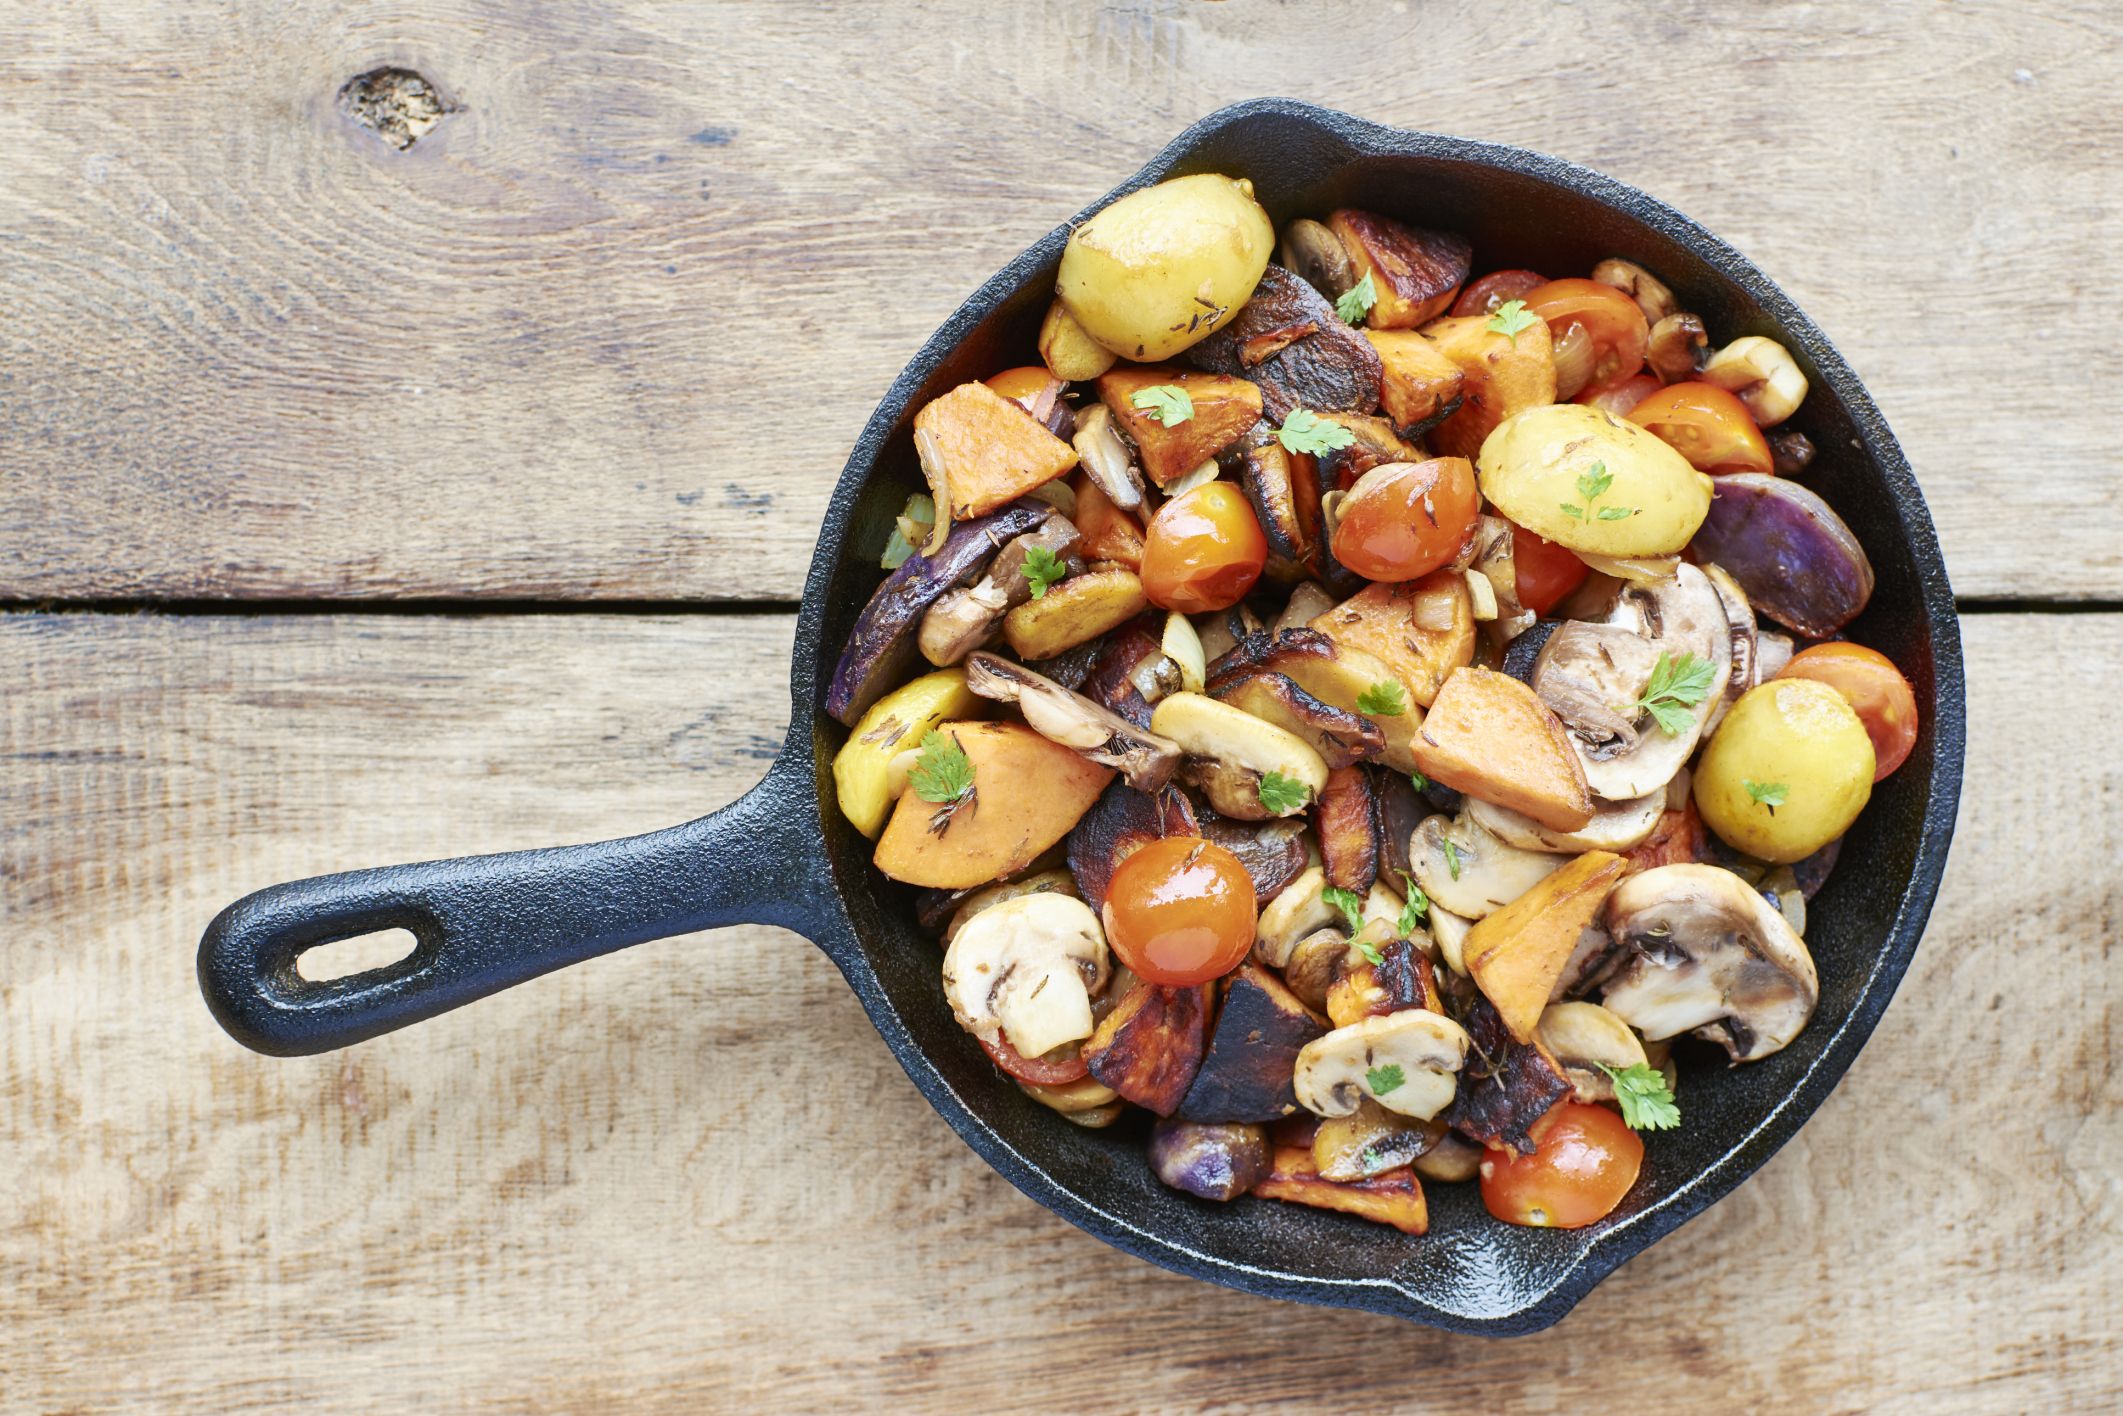 Kitchen Hacks 101: 7 benefits of using cast iron cookware - Times